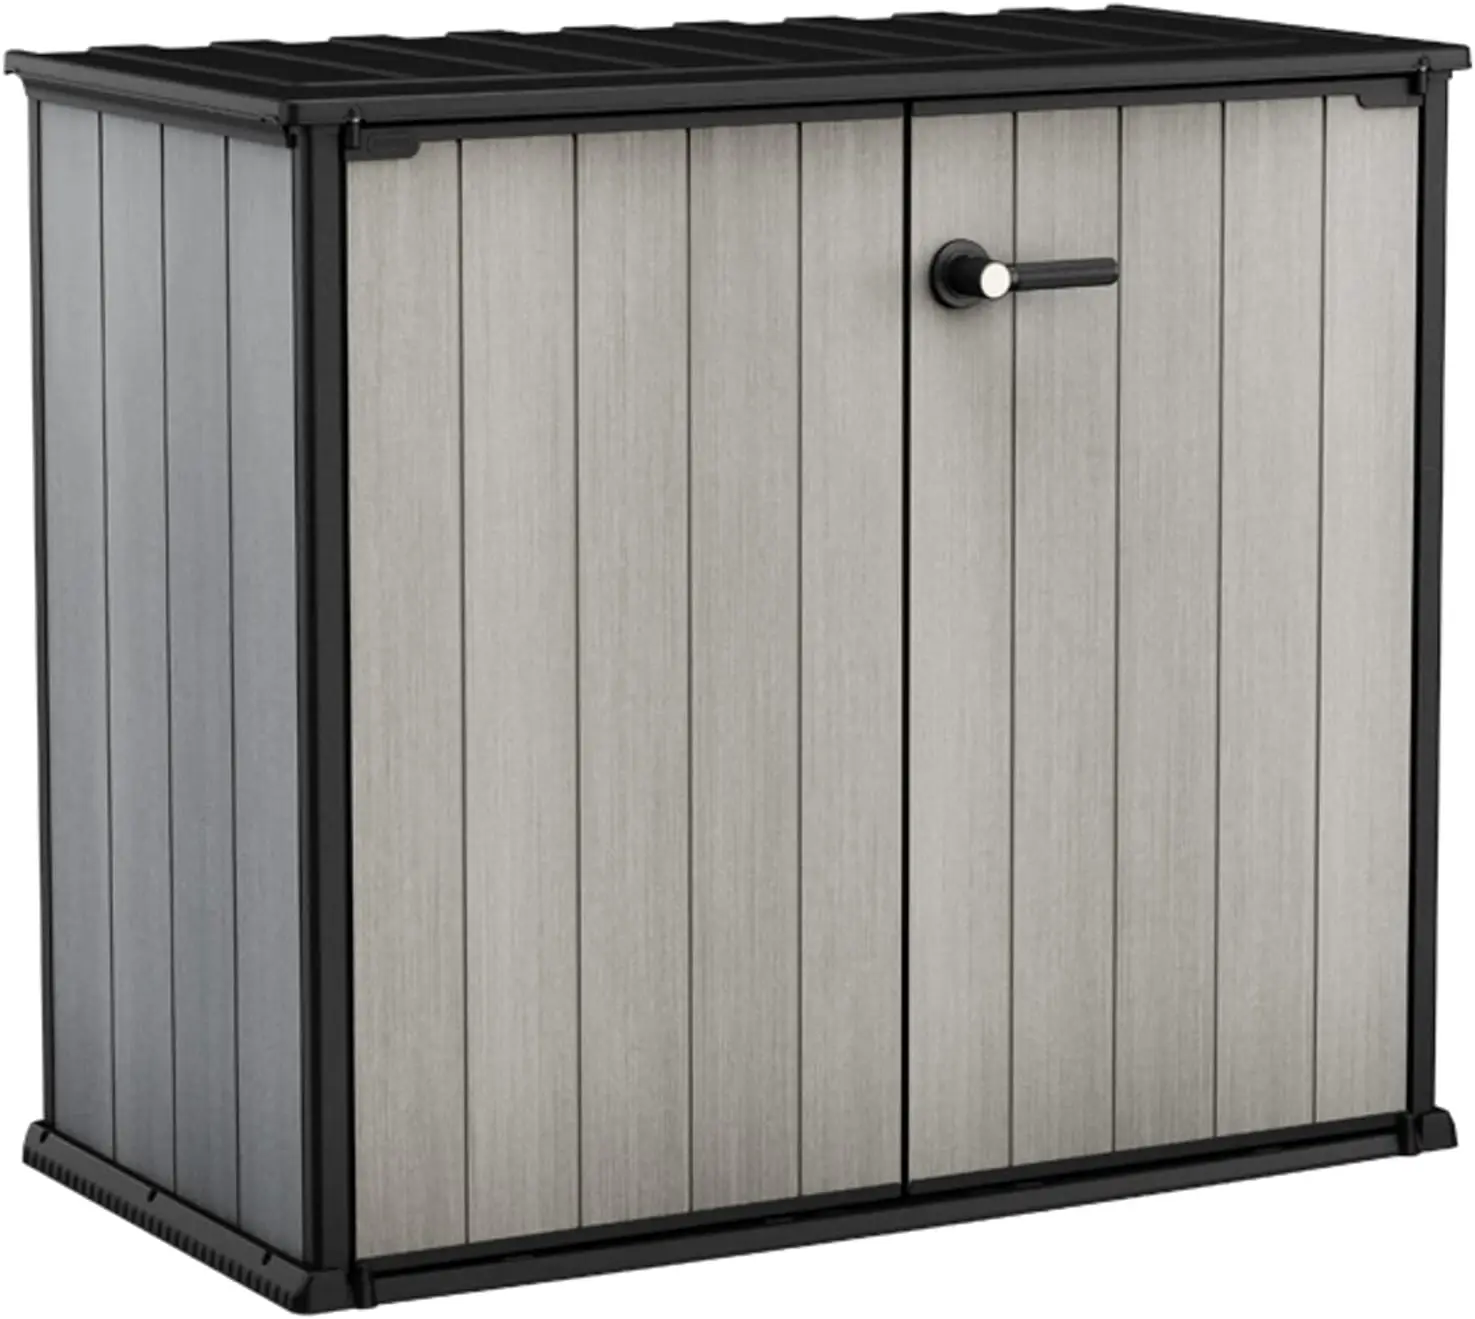 

Keter Patio Store 4.6 x 4.0 ft. Resin Outdoor Storage Shed with Paintable and Drillable Walls for Customization-Perfect for